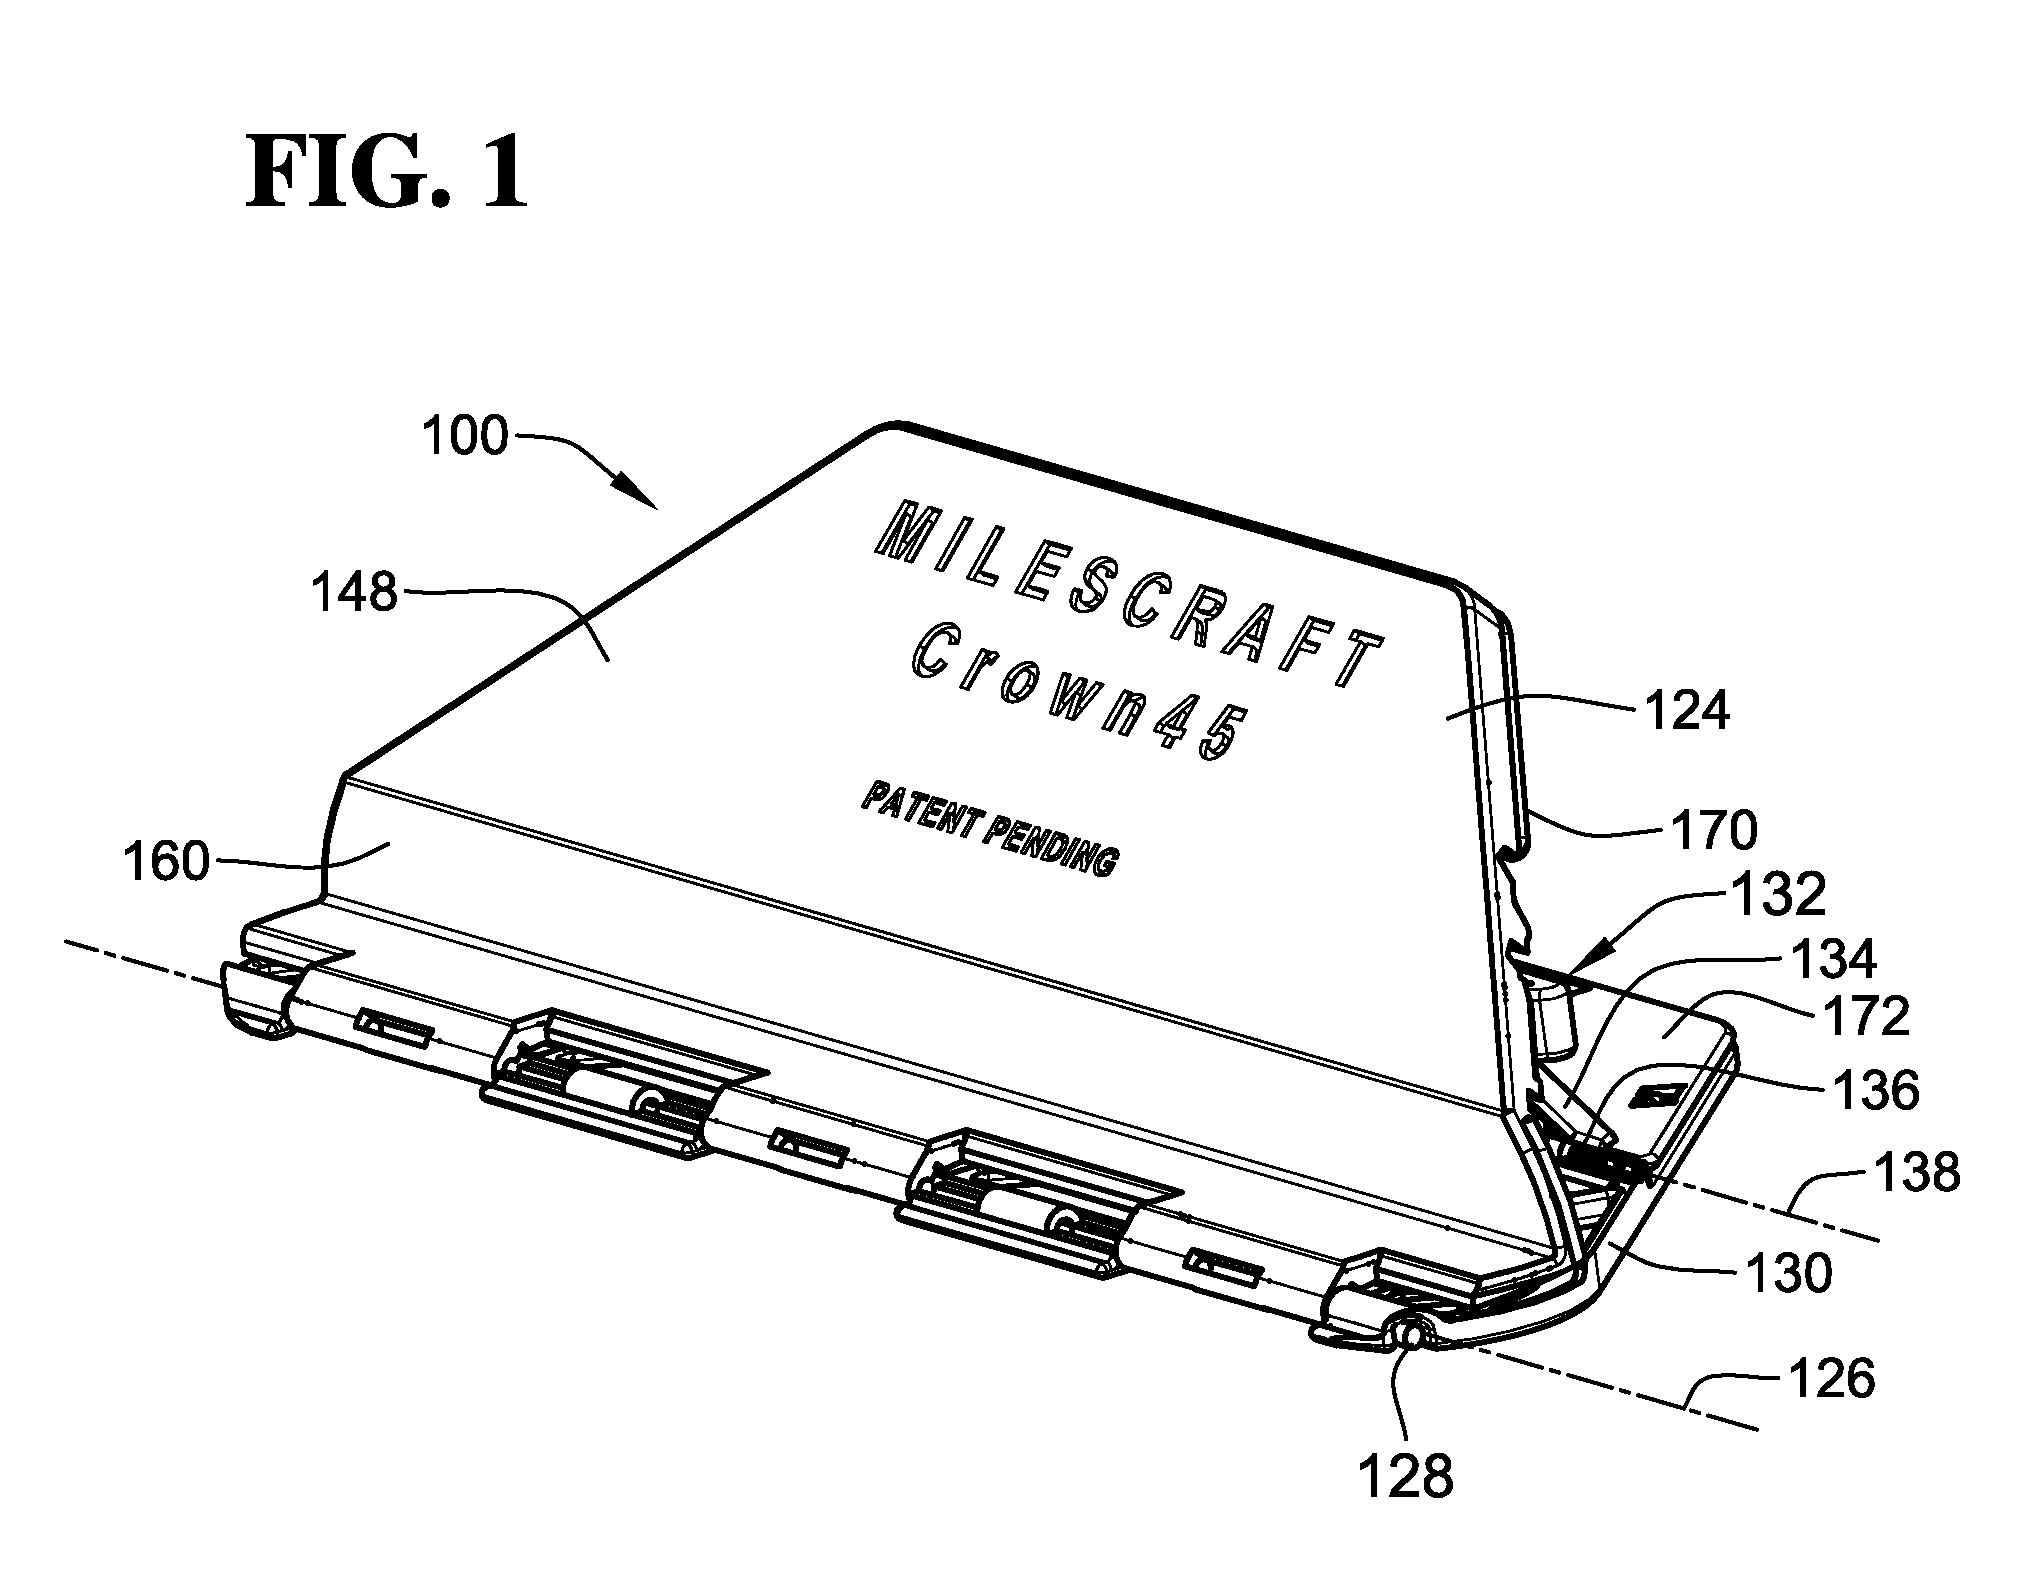 Crown molding cutting apparatus and method